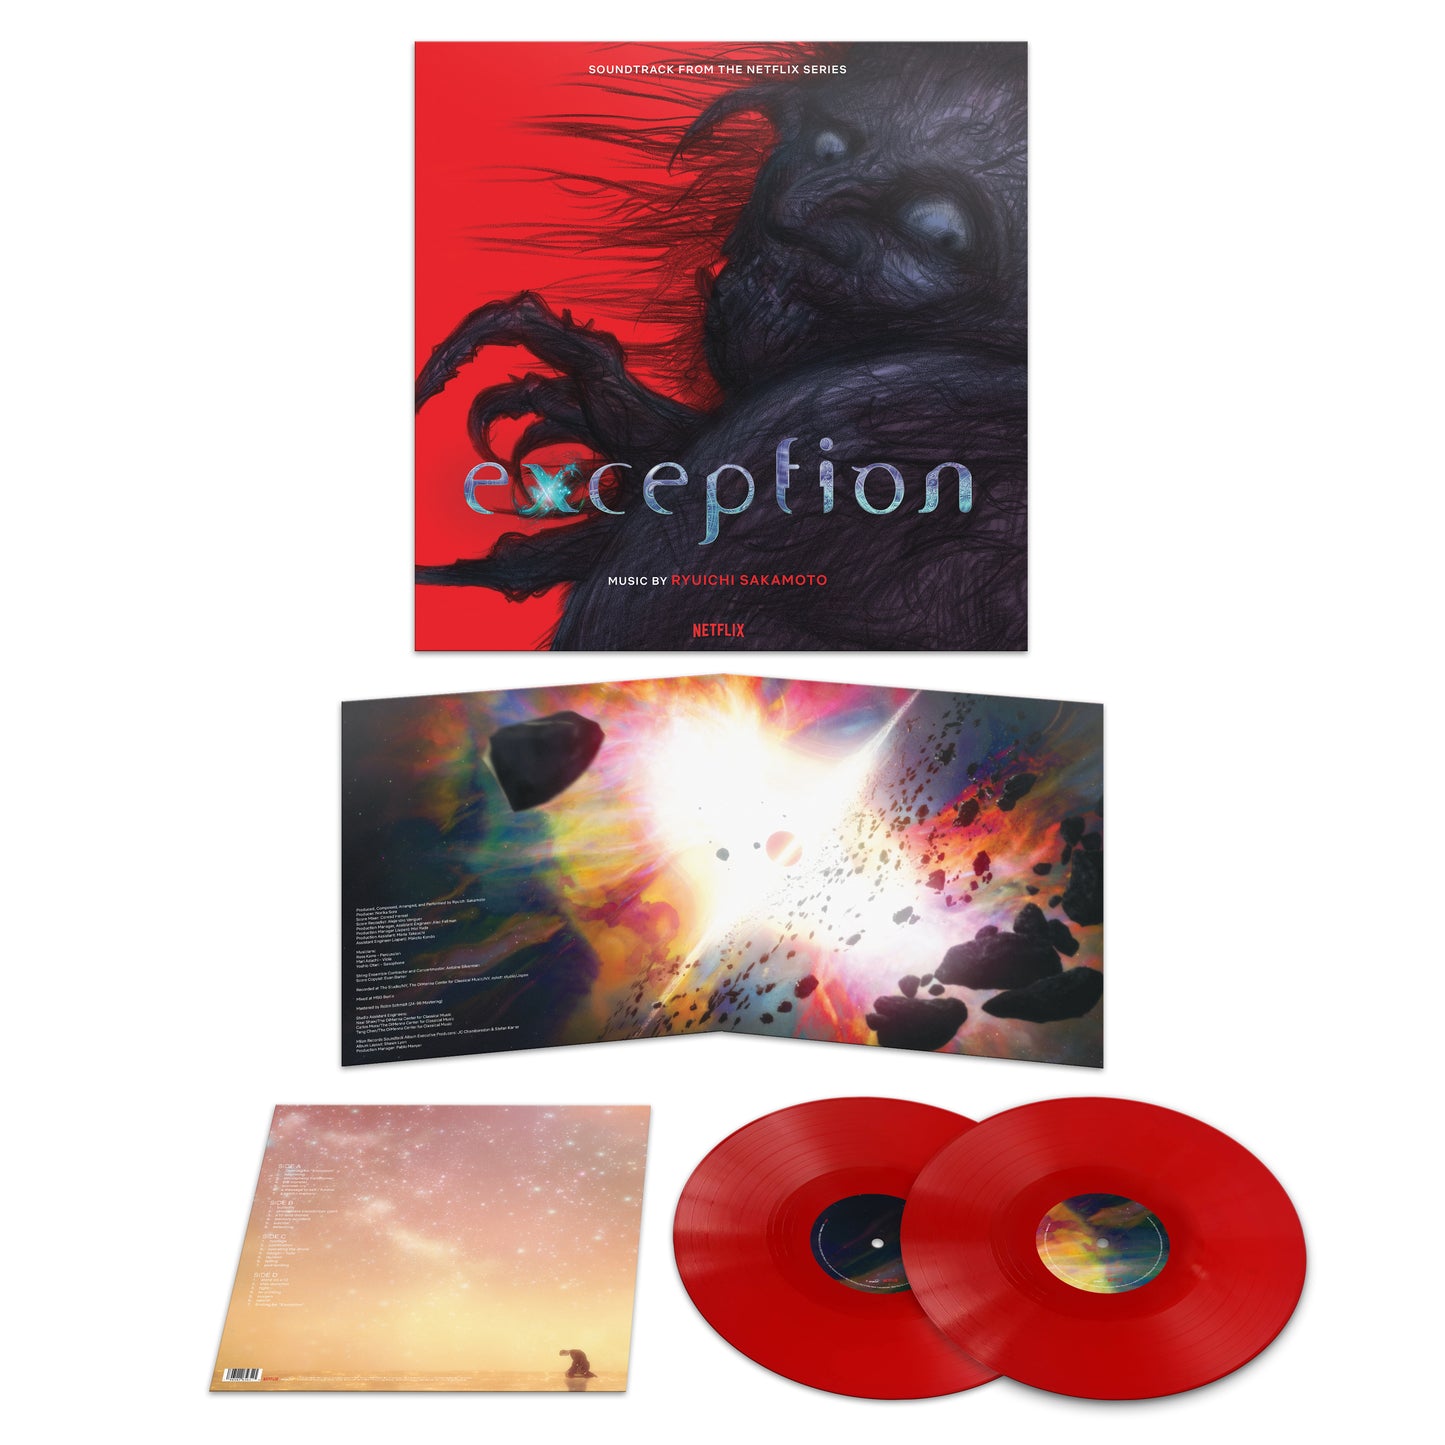 Ryuichi Sakamoto - Exception (Soundtrack from the Netflix Anime Series) - 2X LP